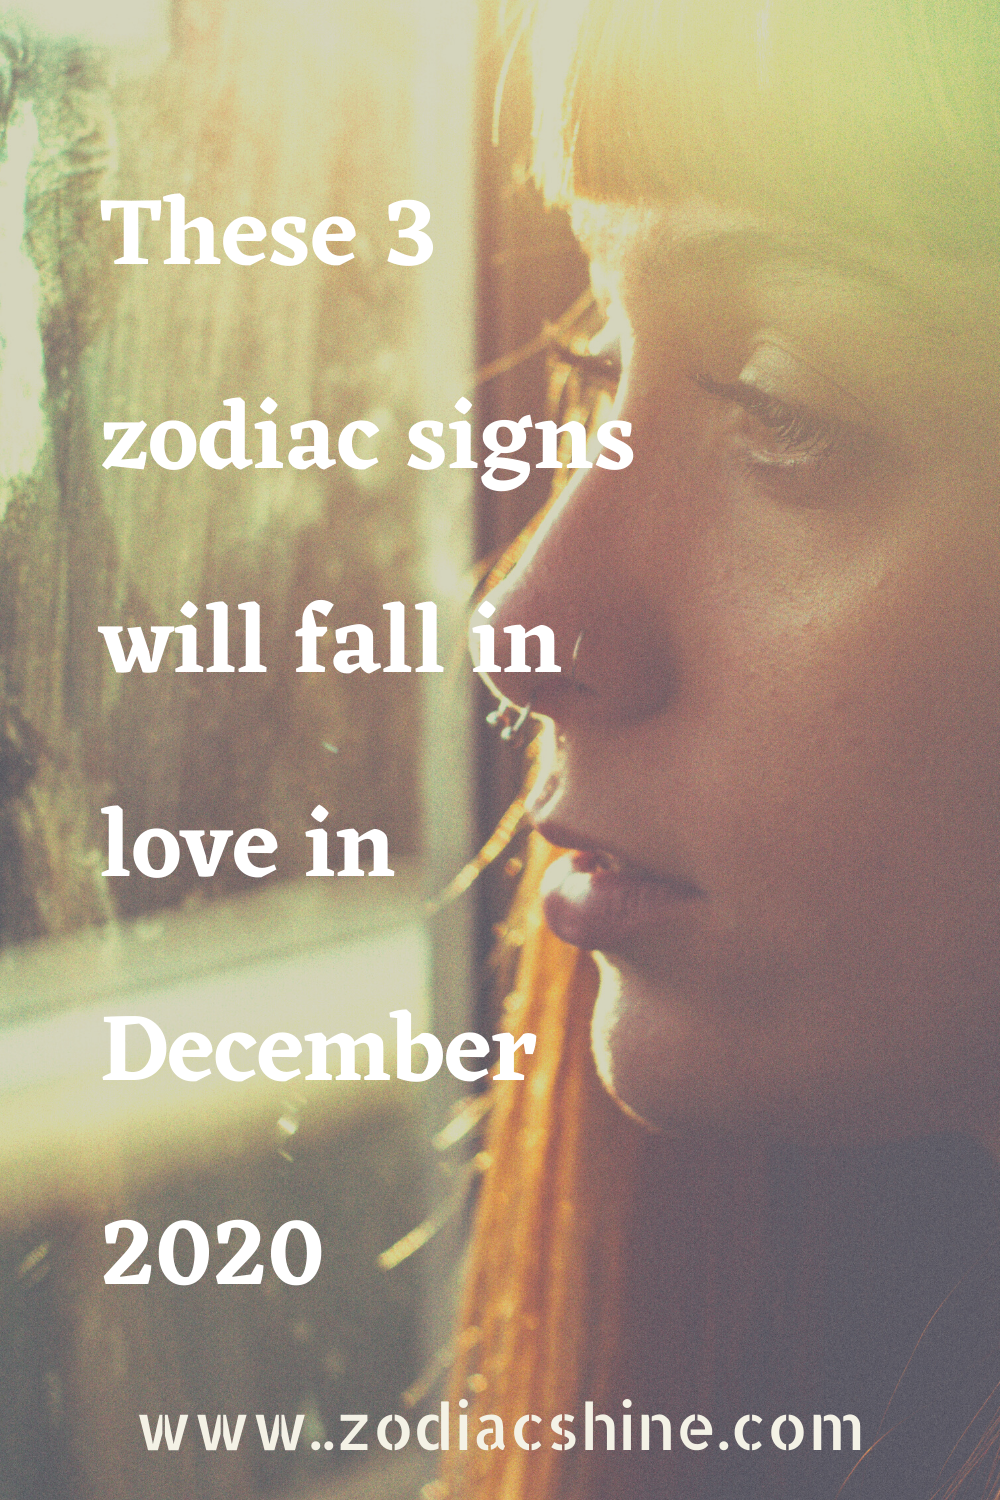 These 3 zodiac signs will fall in love in December 2020